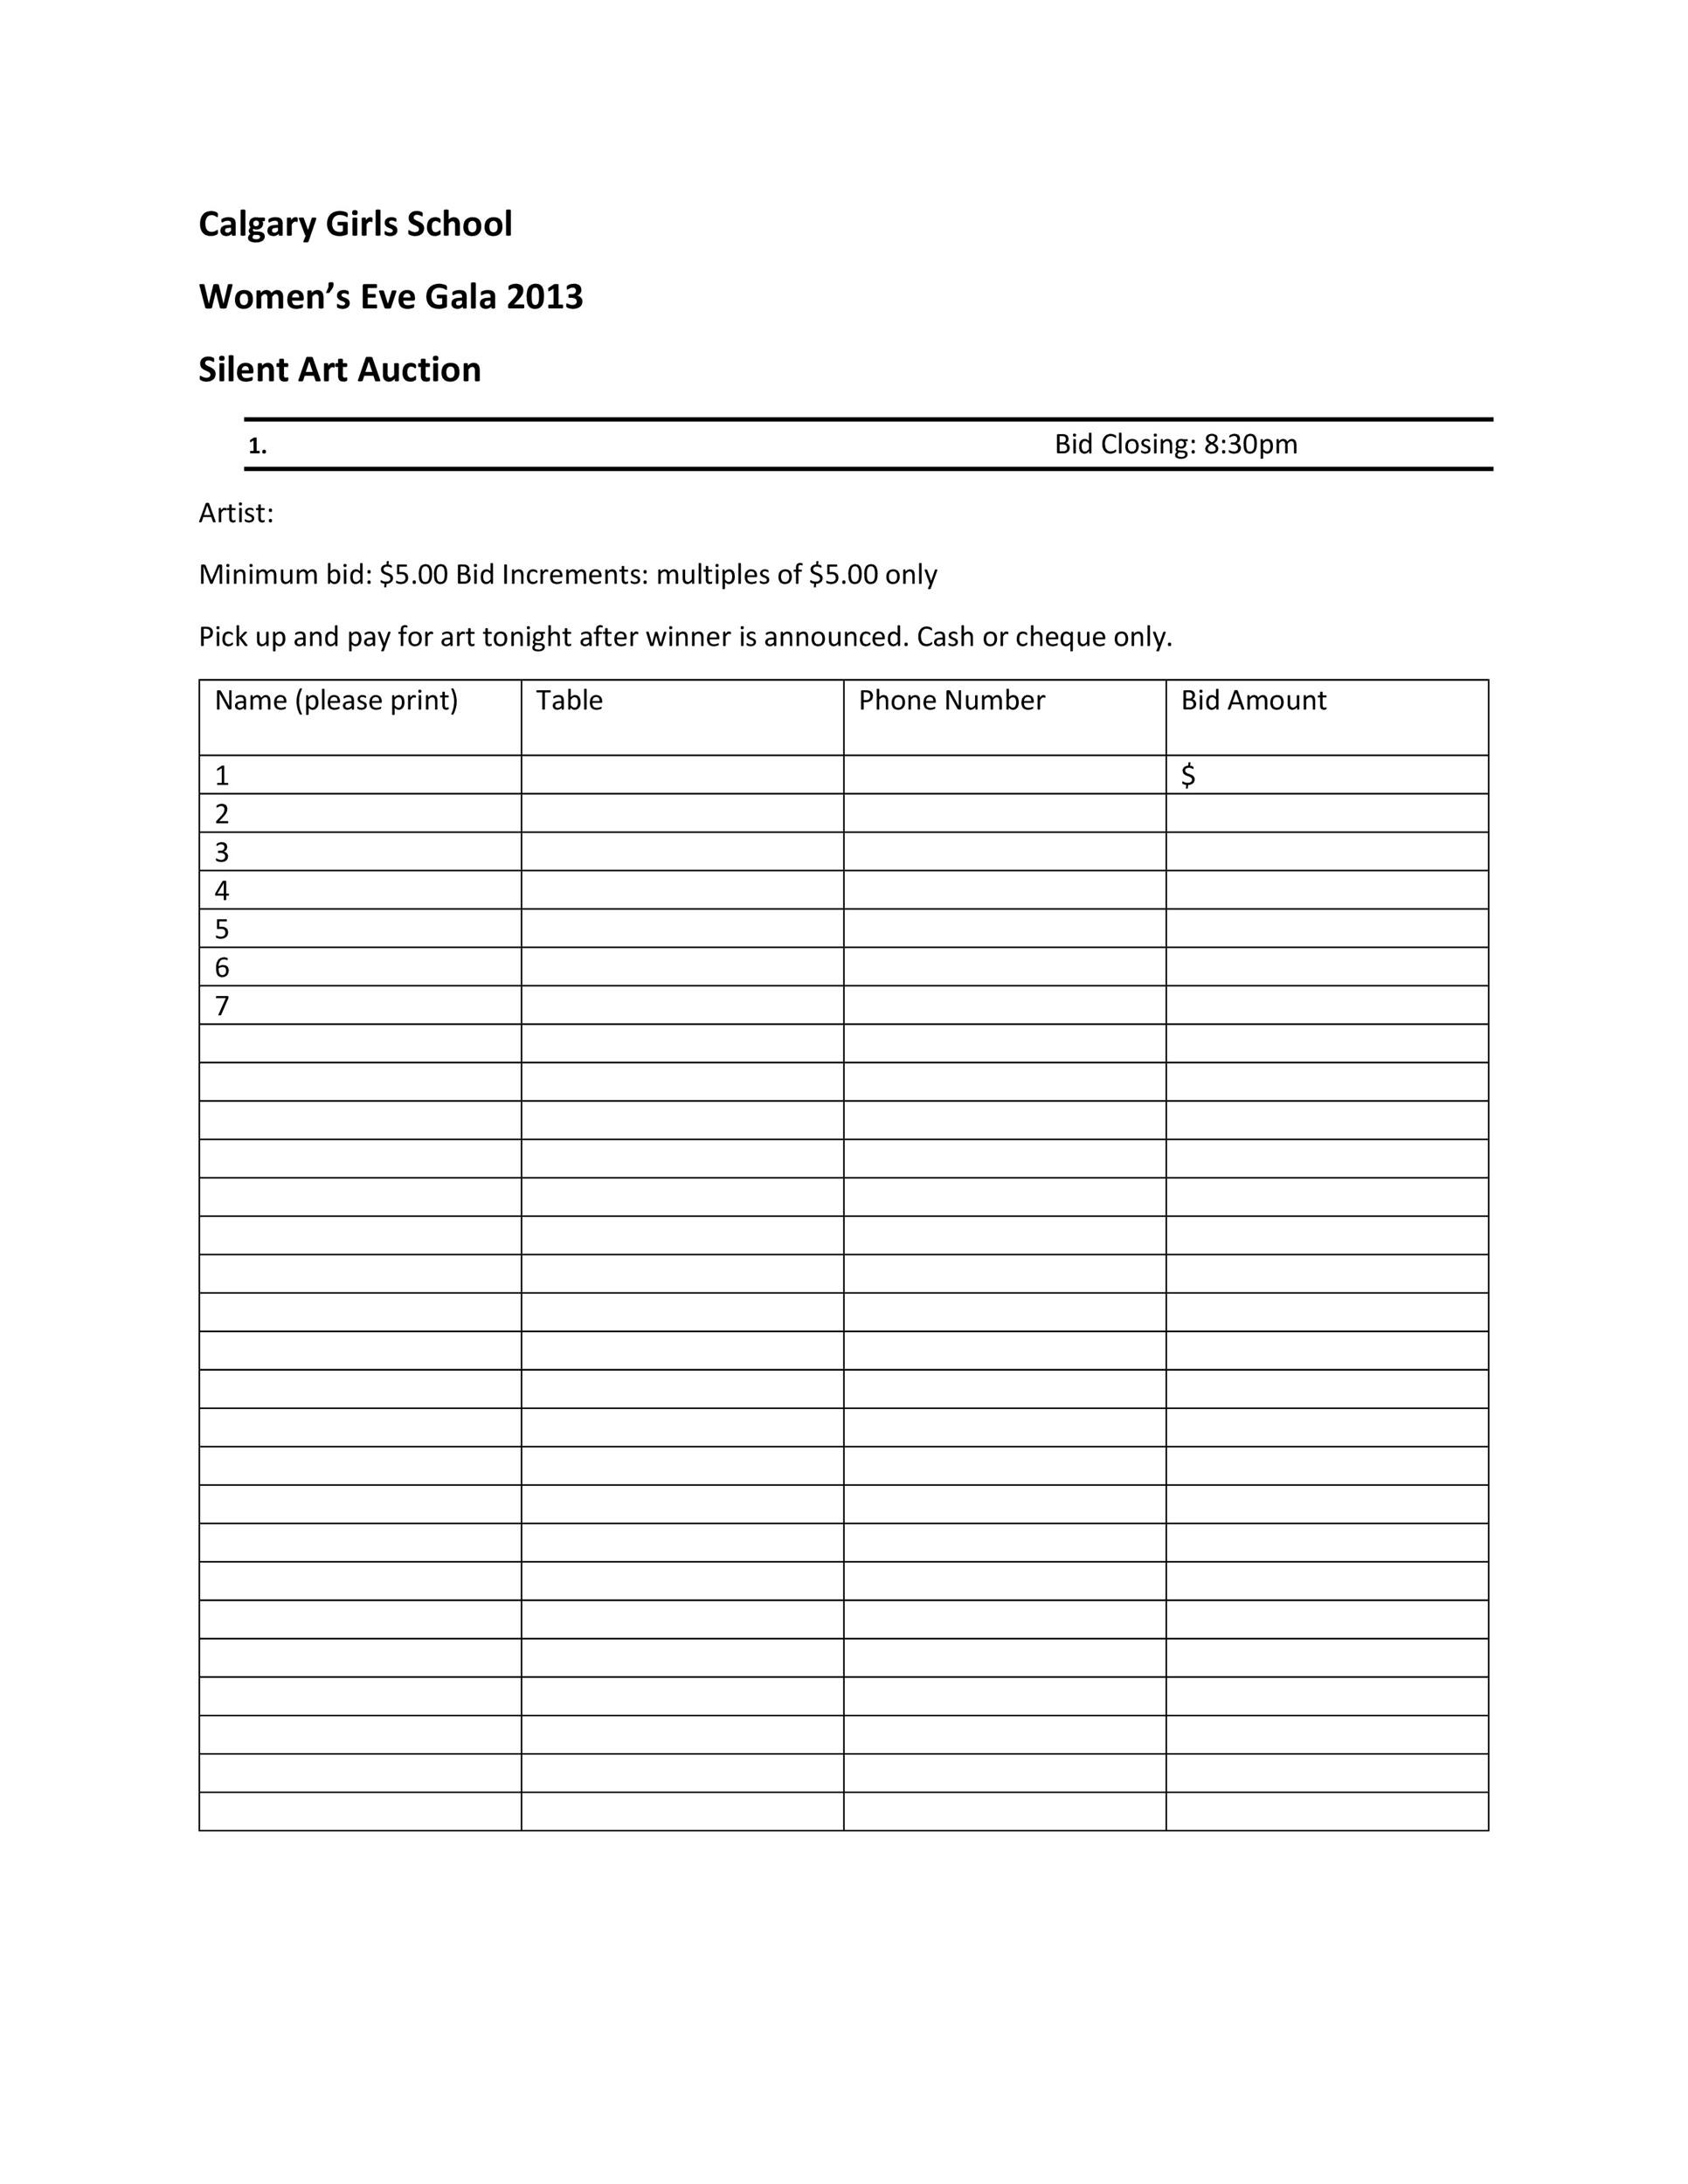 40+ Silent Auction Bid Sheet Templates [Word, Excel] ᐅ Template Lab